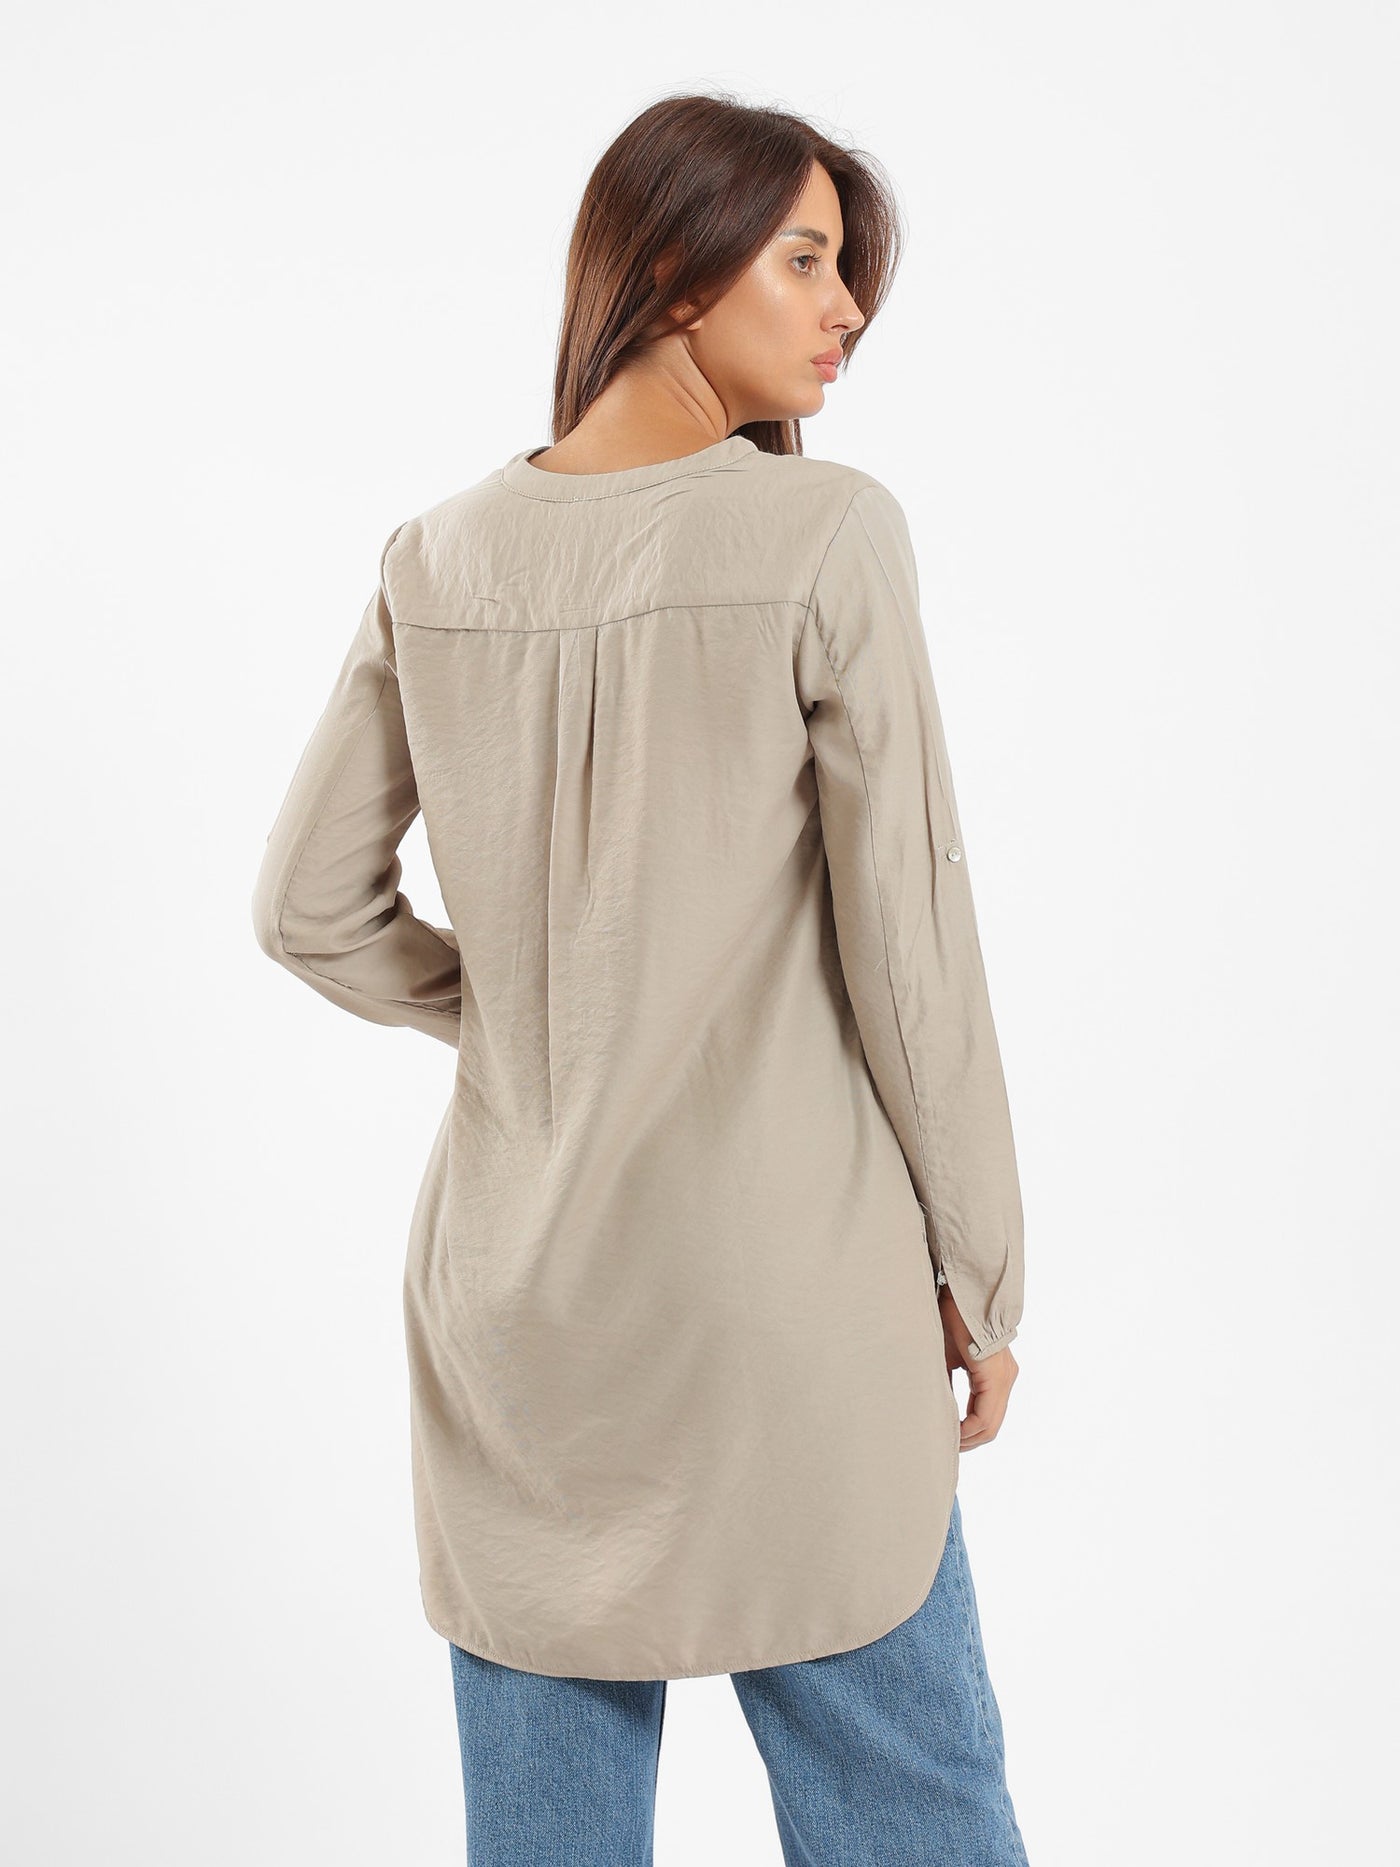 Blouse - Oversized - High-Low